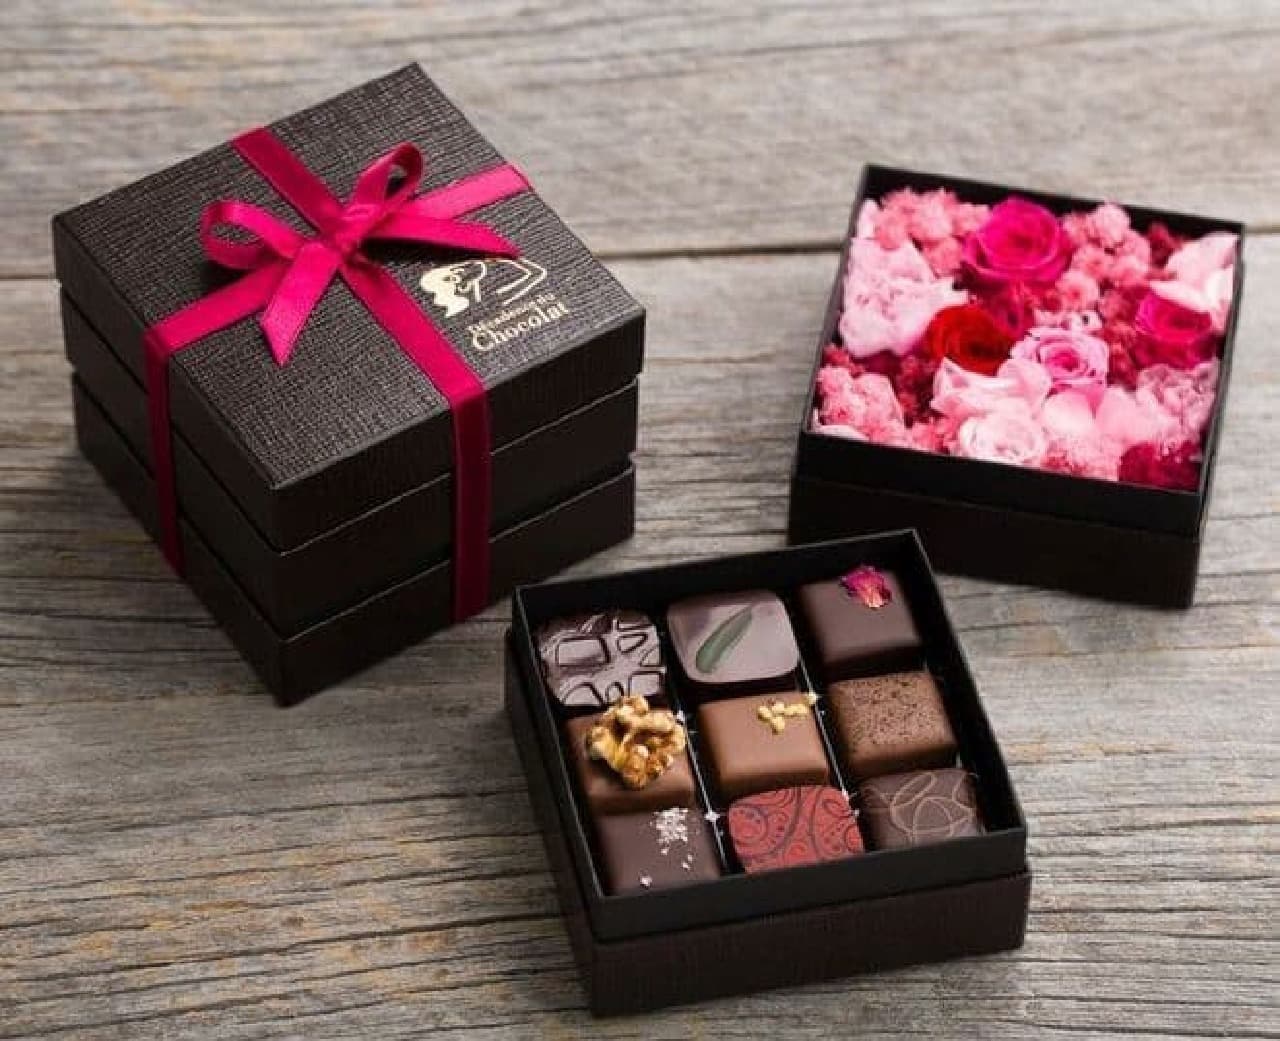 A limited number of gift boxes with preserved flowers and 9 bonbon chocolates